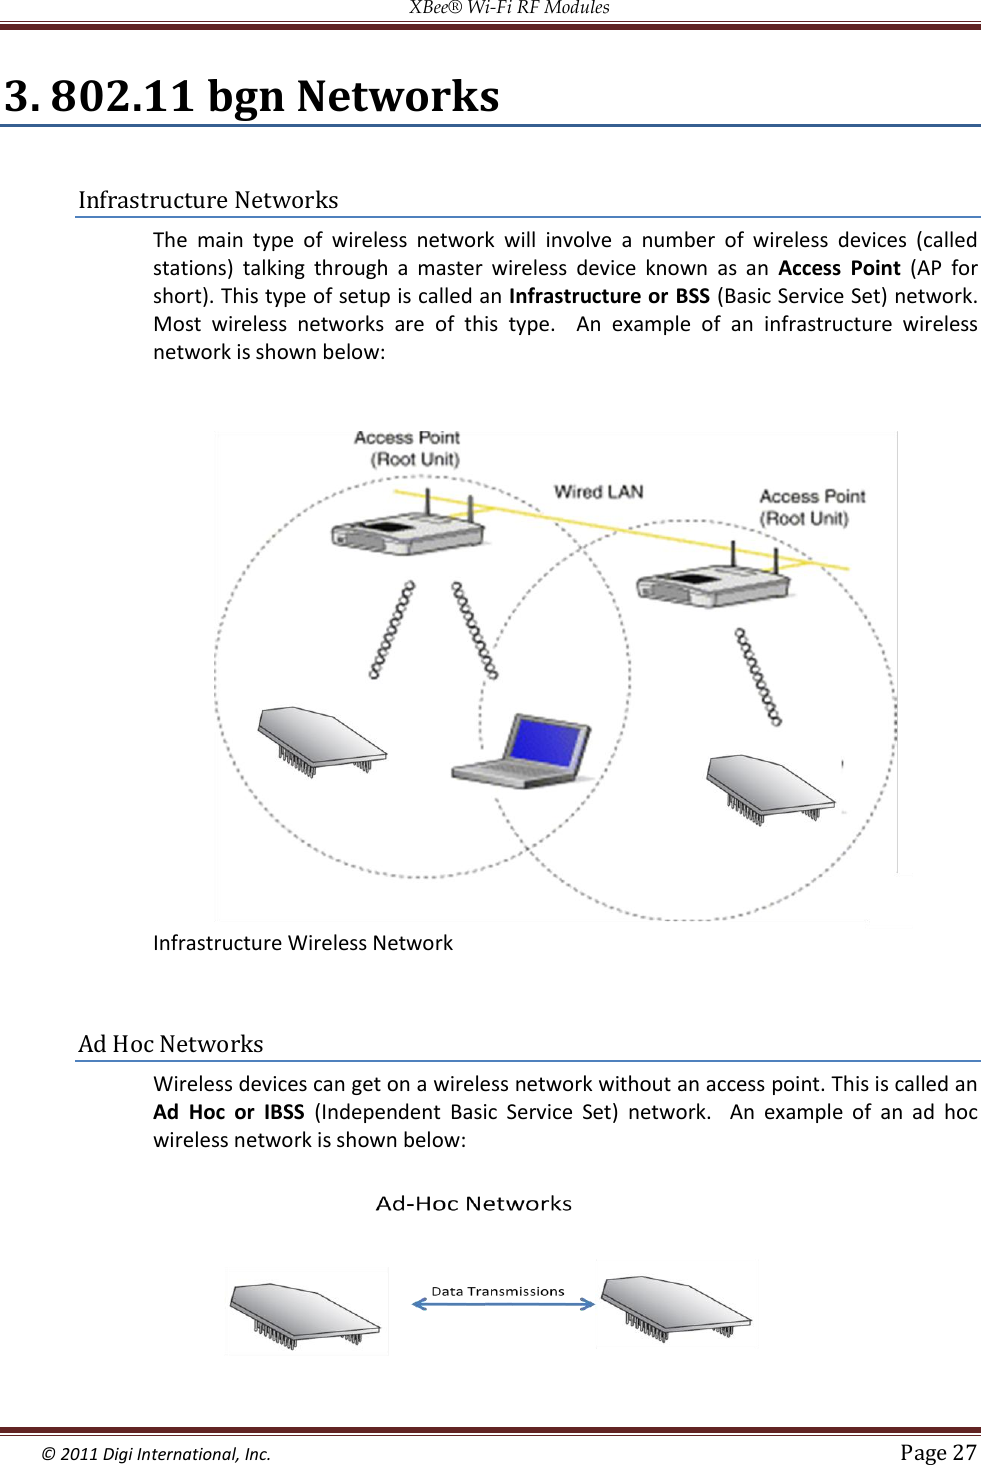 XBee® Wi-Fi RF Modules  © 2011 Digi International, Inc.   Page 27  3. 802.11 bgn Networks  Infrastructure Networks The  main  type  of  wireless  network  will  involve  a  number  of  wireless  devices  (called stations)  talking  through  a  master  wireless  device  known  as  an  Access  Point  (AP  for short). This type of setup is called an Infrastructure or BSS (Basic Service Set) network. Most  wireless  networks  are  of  this  type.  An  example  of  an  infrastructure  wireless network is shown below:                                      Infrastructure Wireless Network  Ad Hoc Networks Wireless devices can get on a wireless network without an access point. This is called an Ad  Hoc  or  IBSS  (Independent  Basic  Service  Set) network.    An  example  of  an  ad  hoc wireless network is shown below:                                        